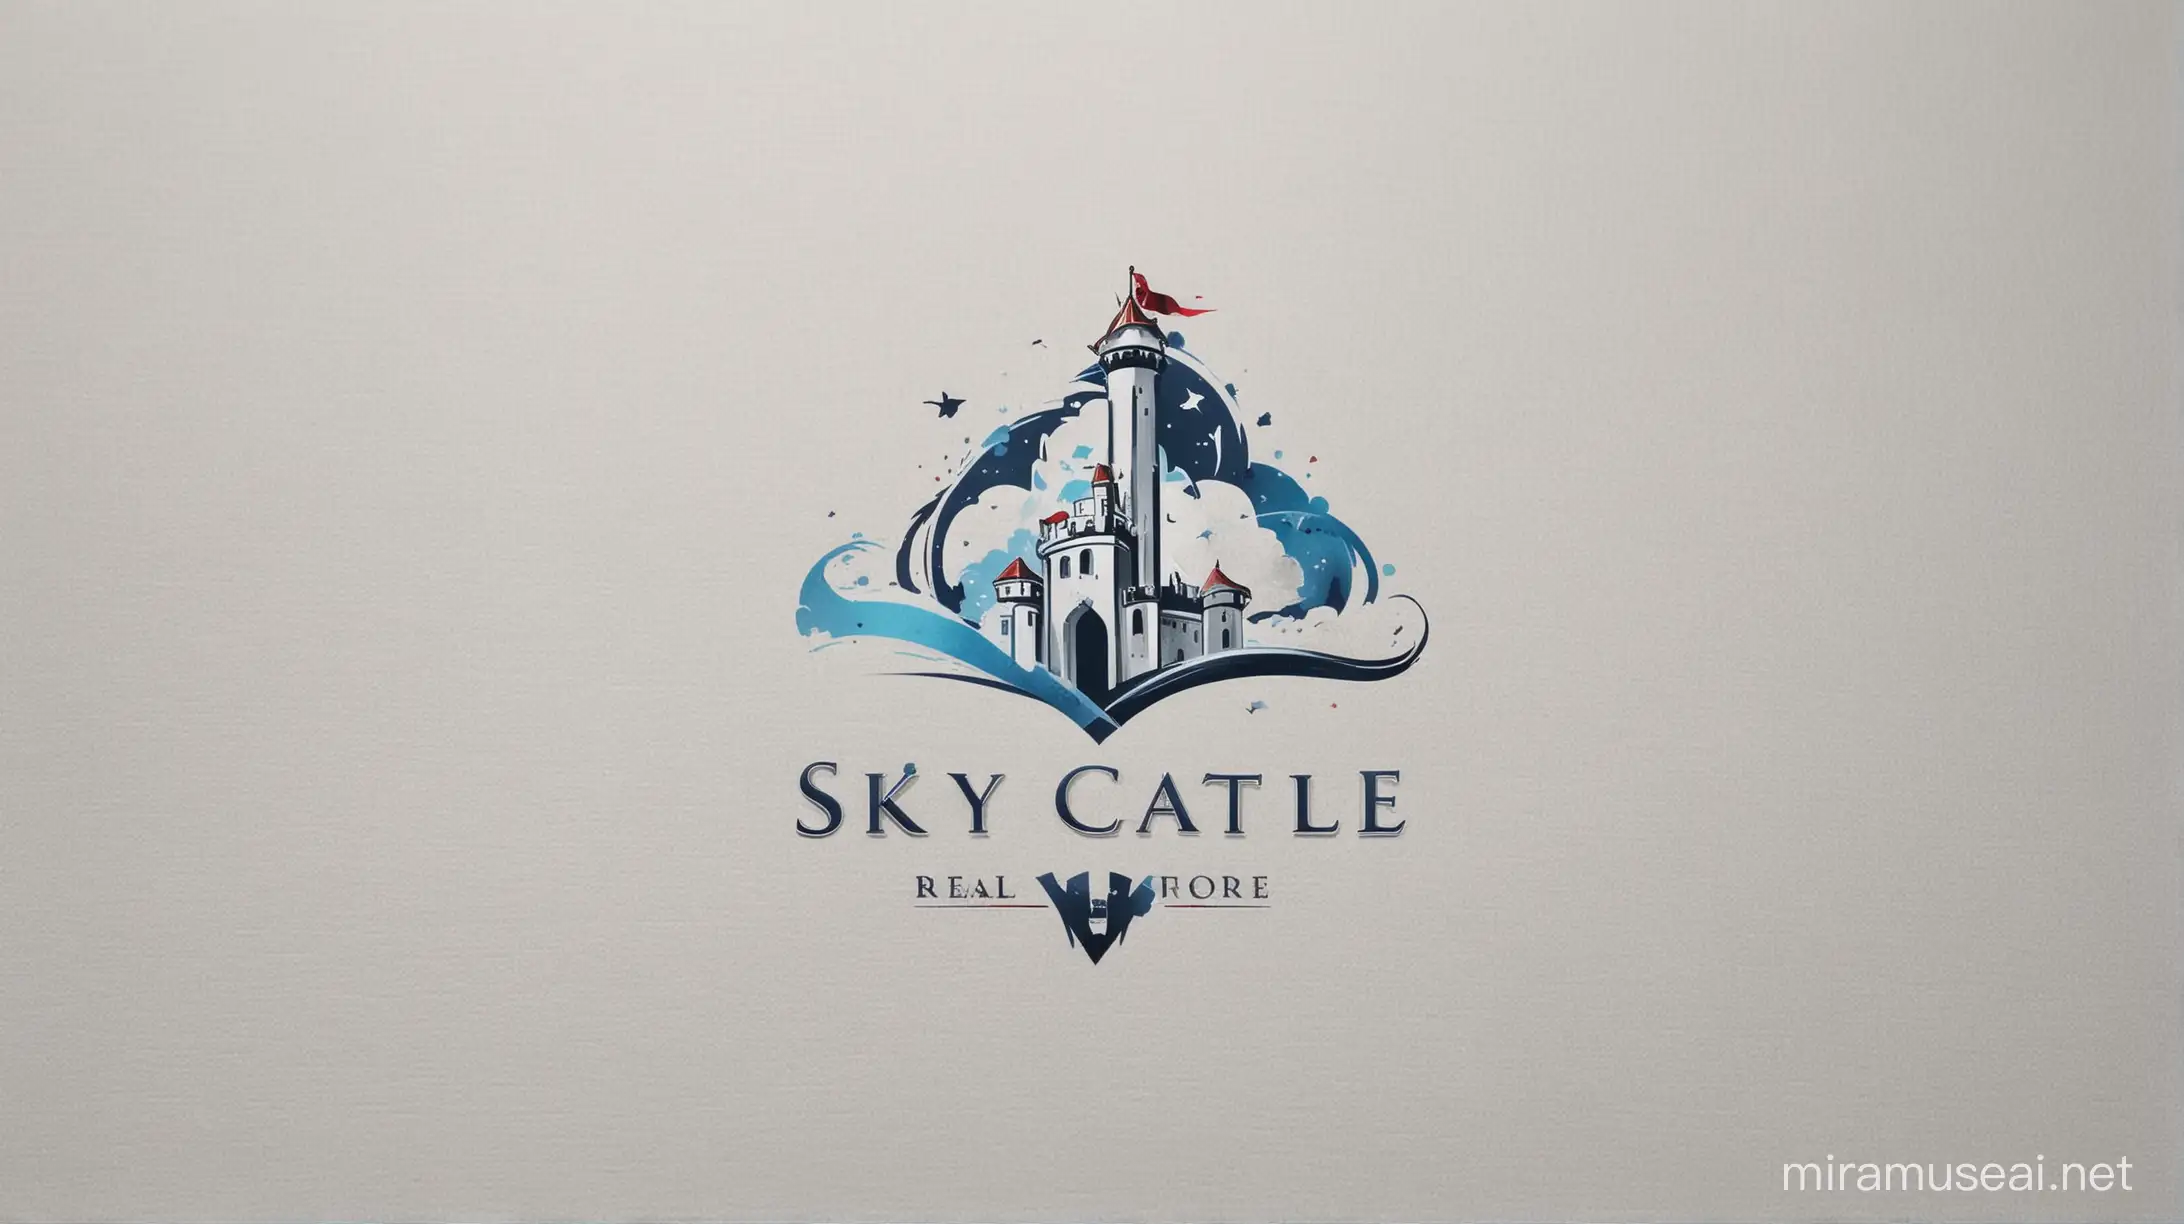 design a logo for the real estate company with their name is: SKY CASTLE REALTORES